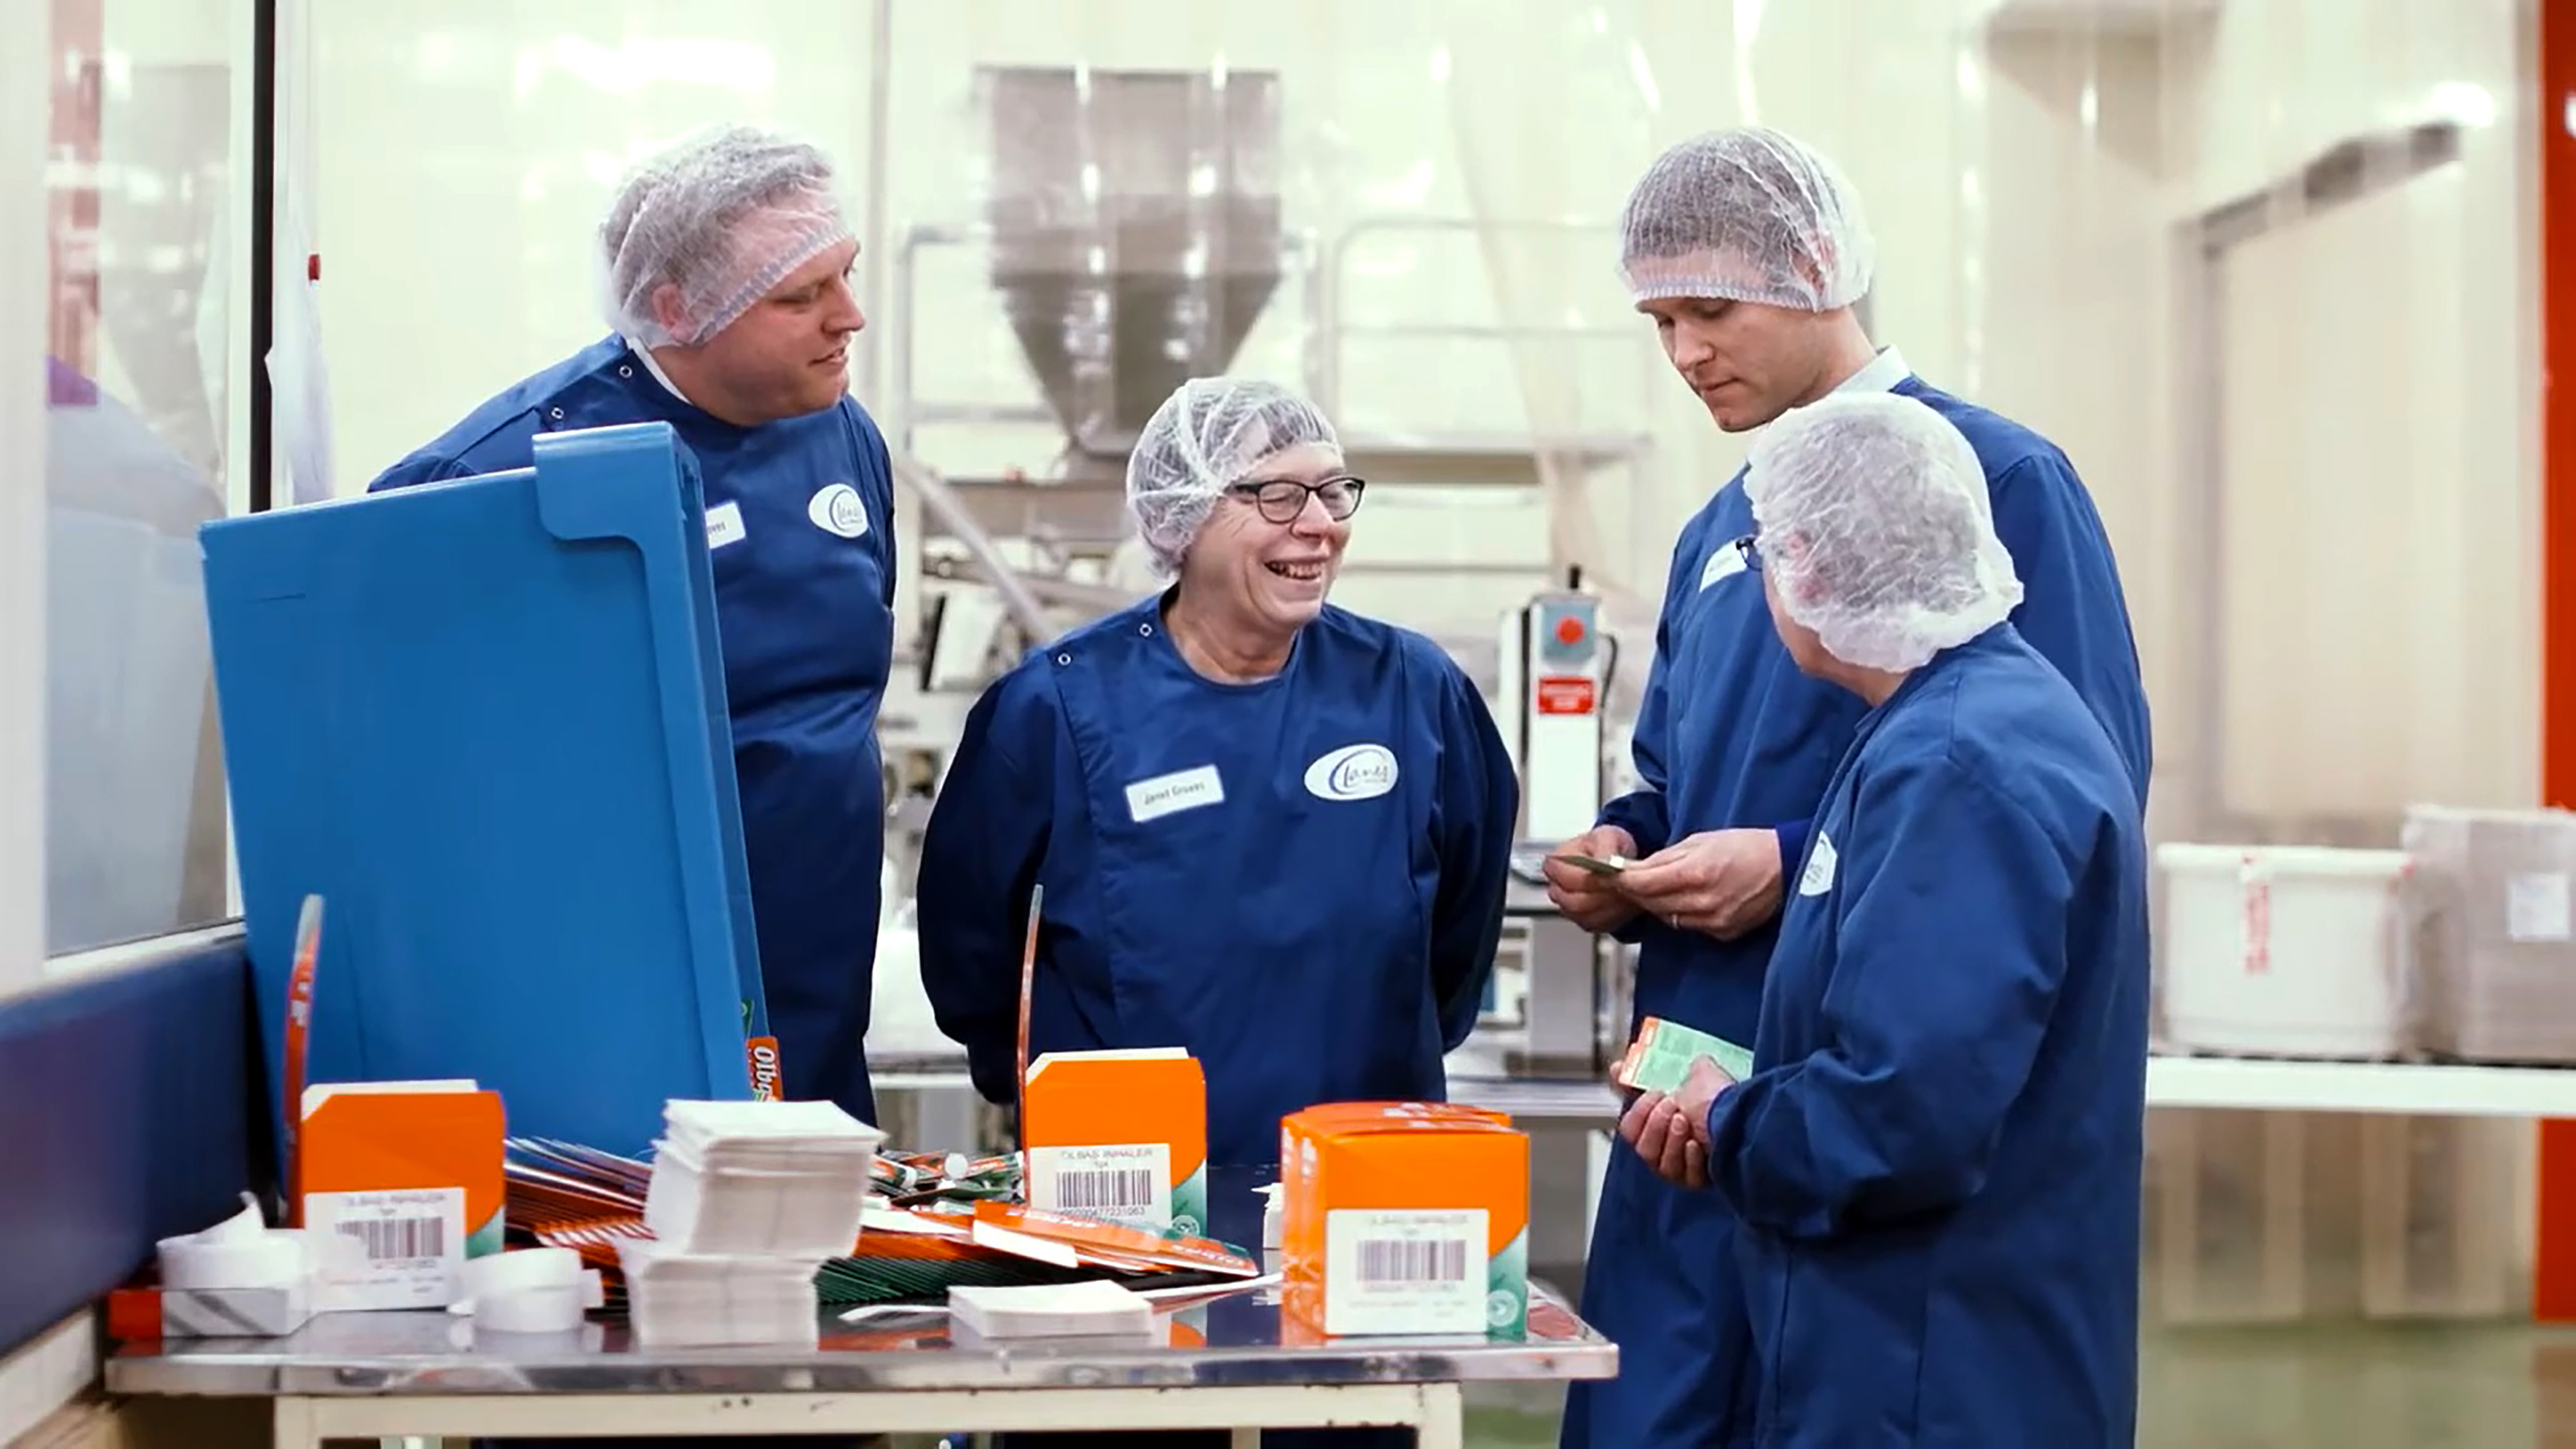 janet-and-jon-and-robin-factory-visit-2019